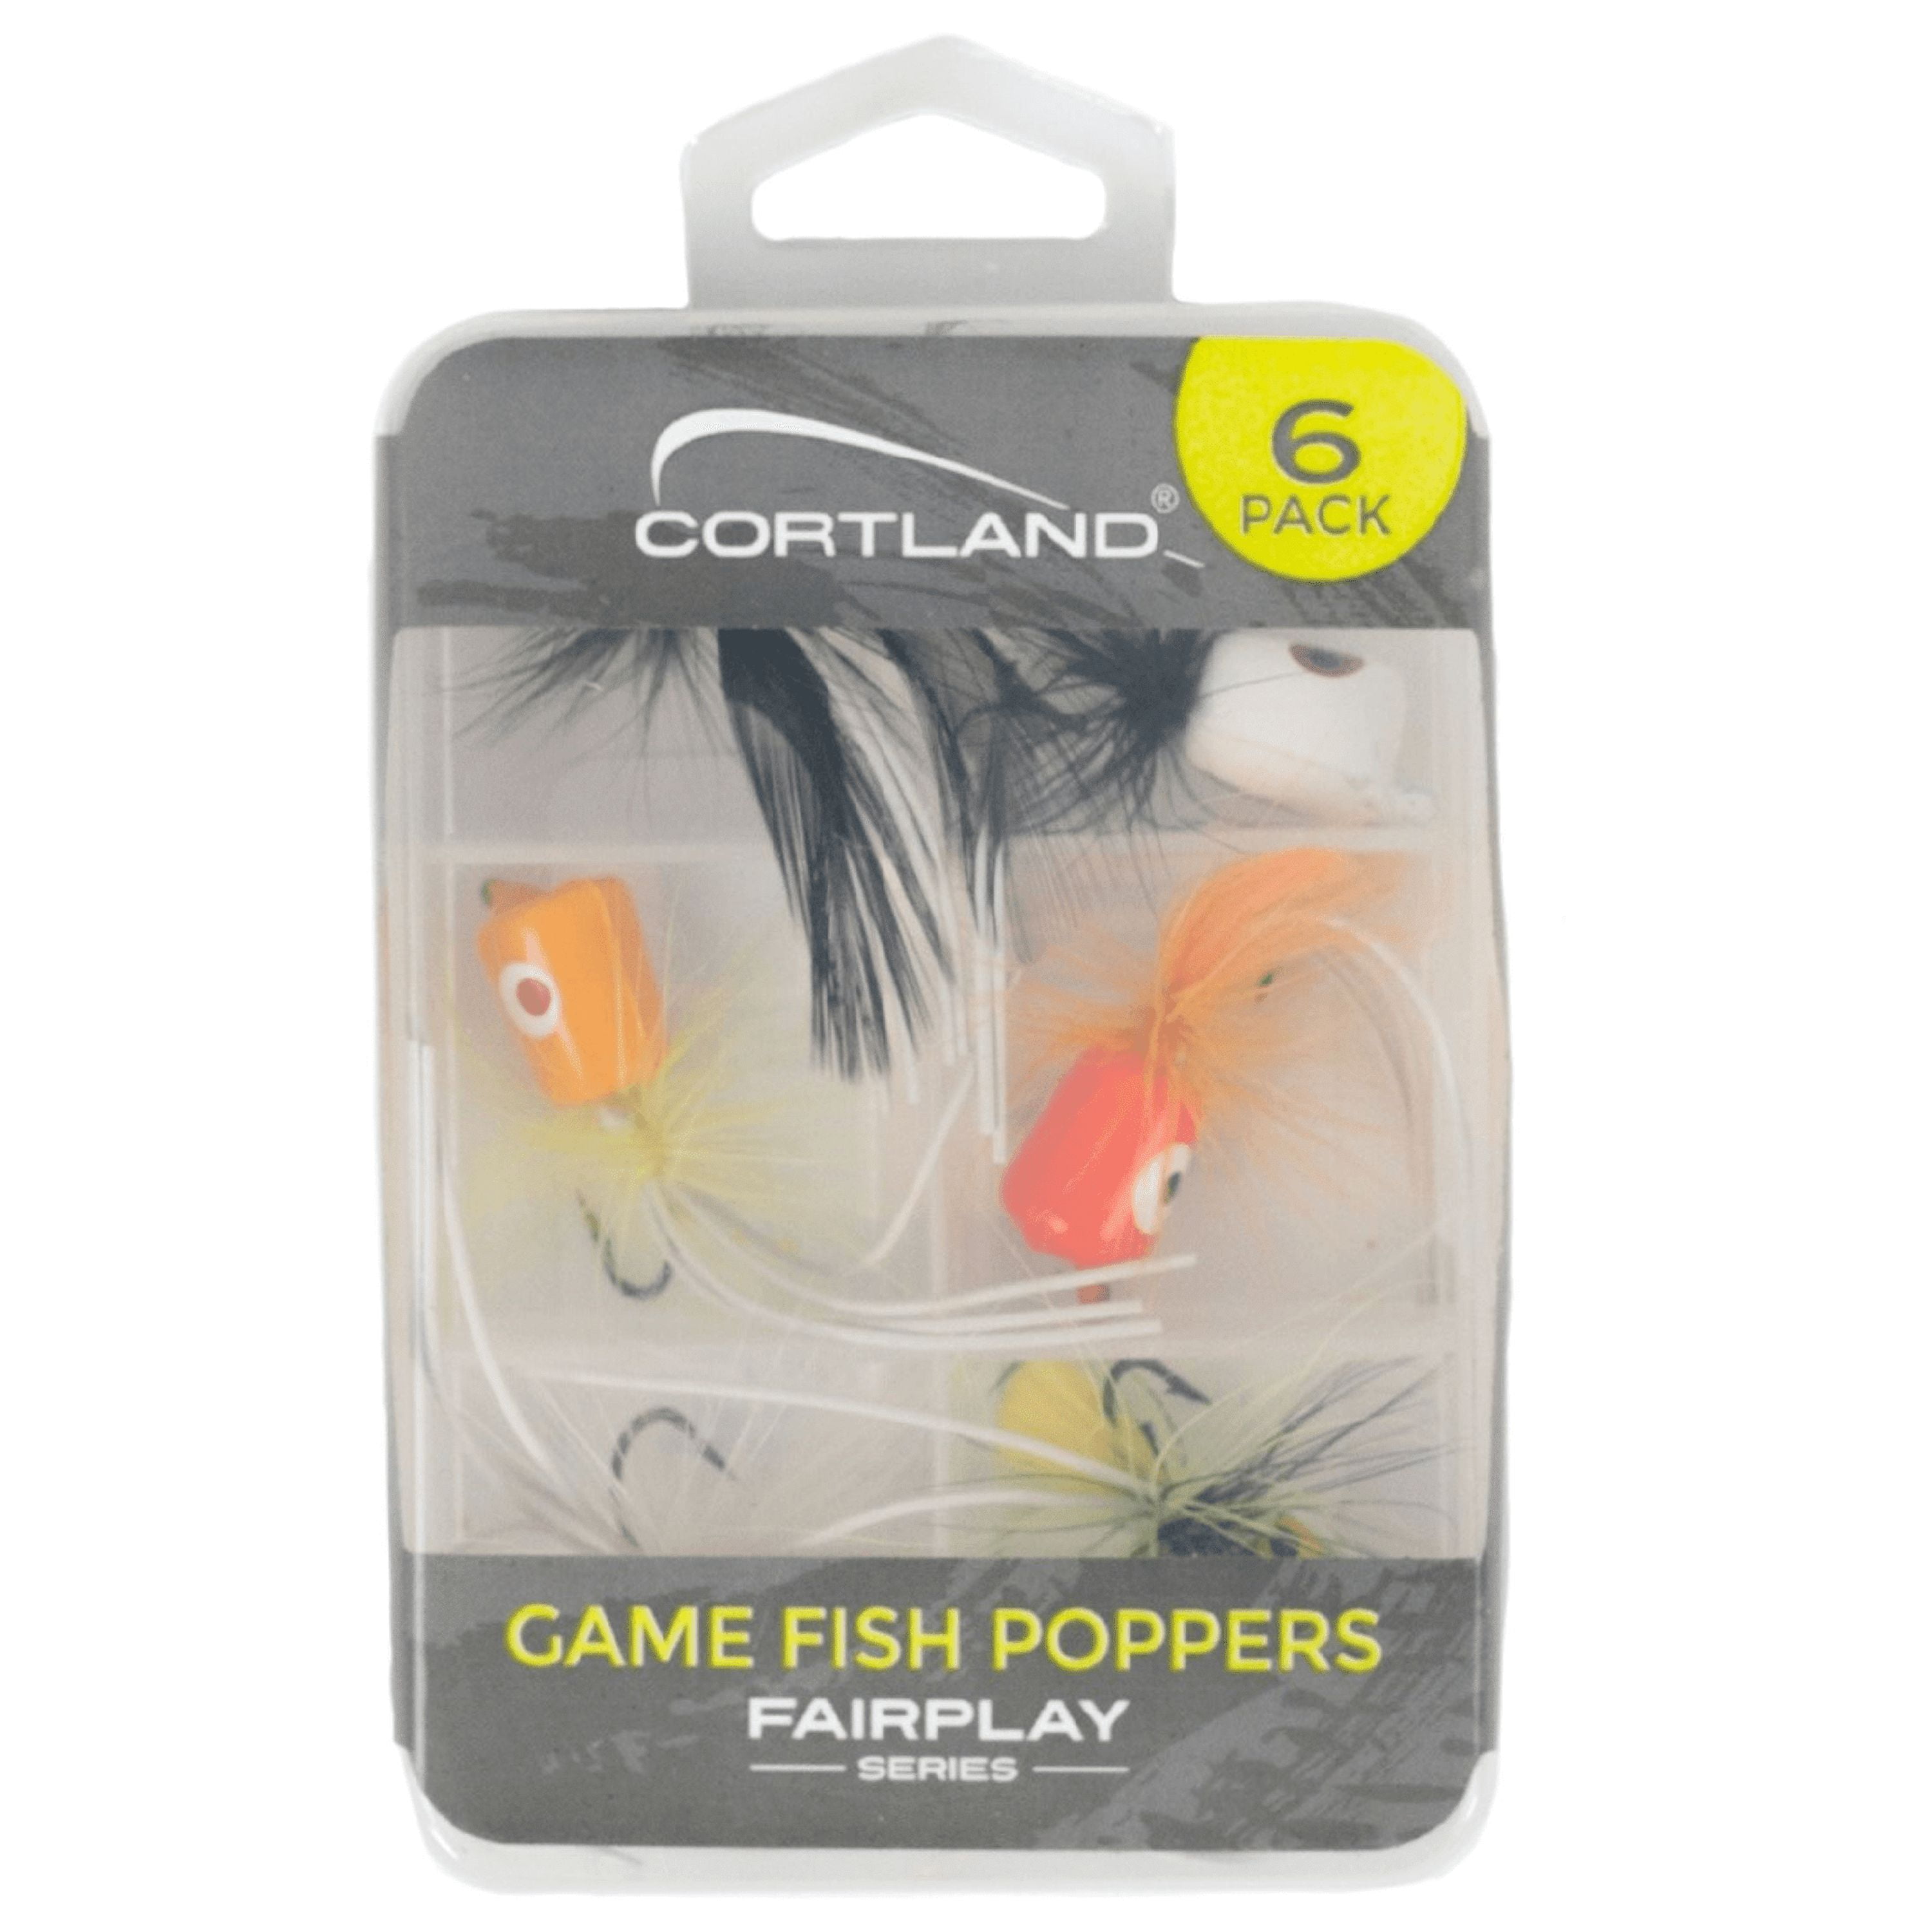 Cortland Fairplay Game Fish Poppers/Flies, 6 Count, 664784